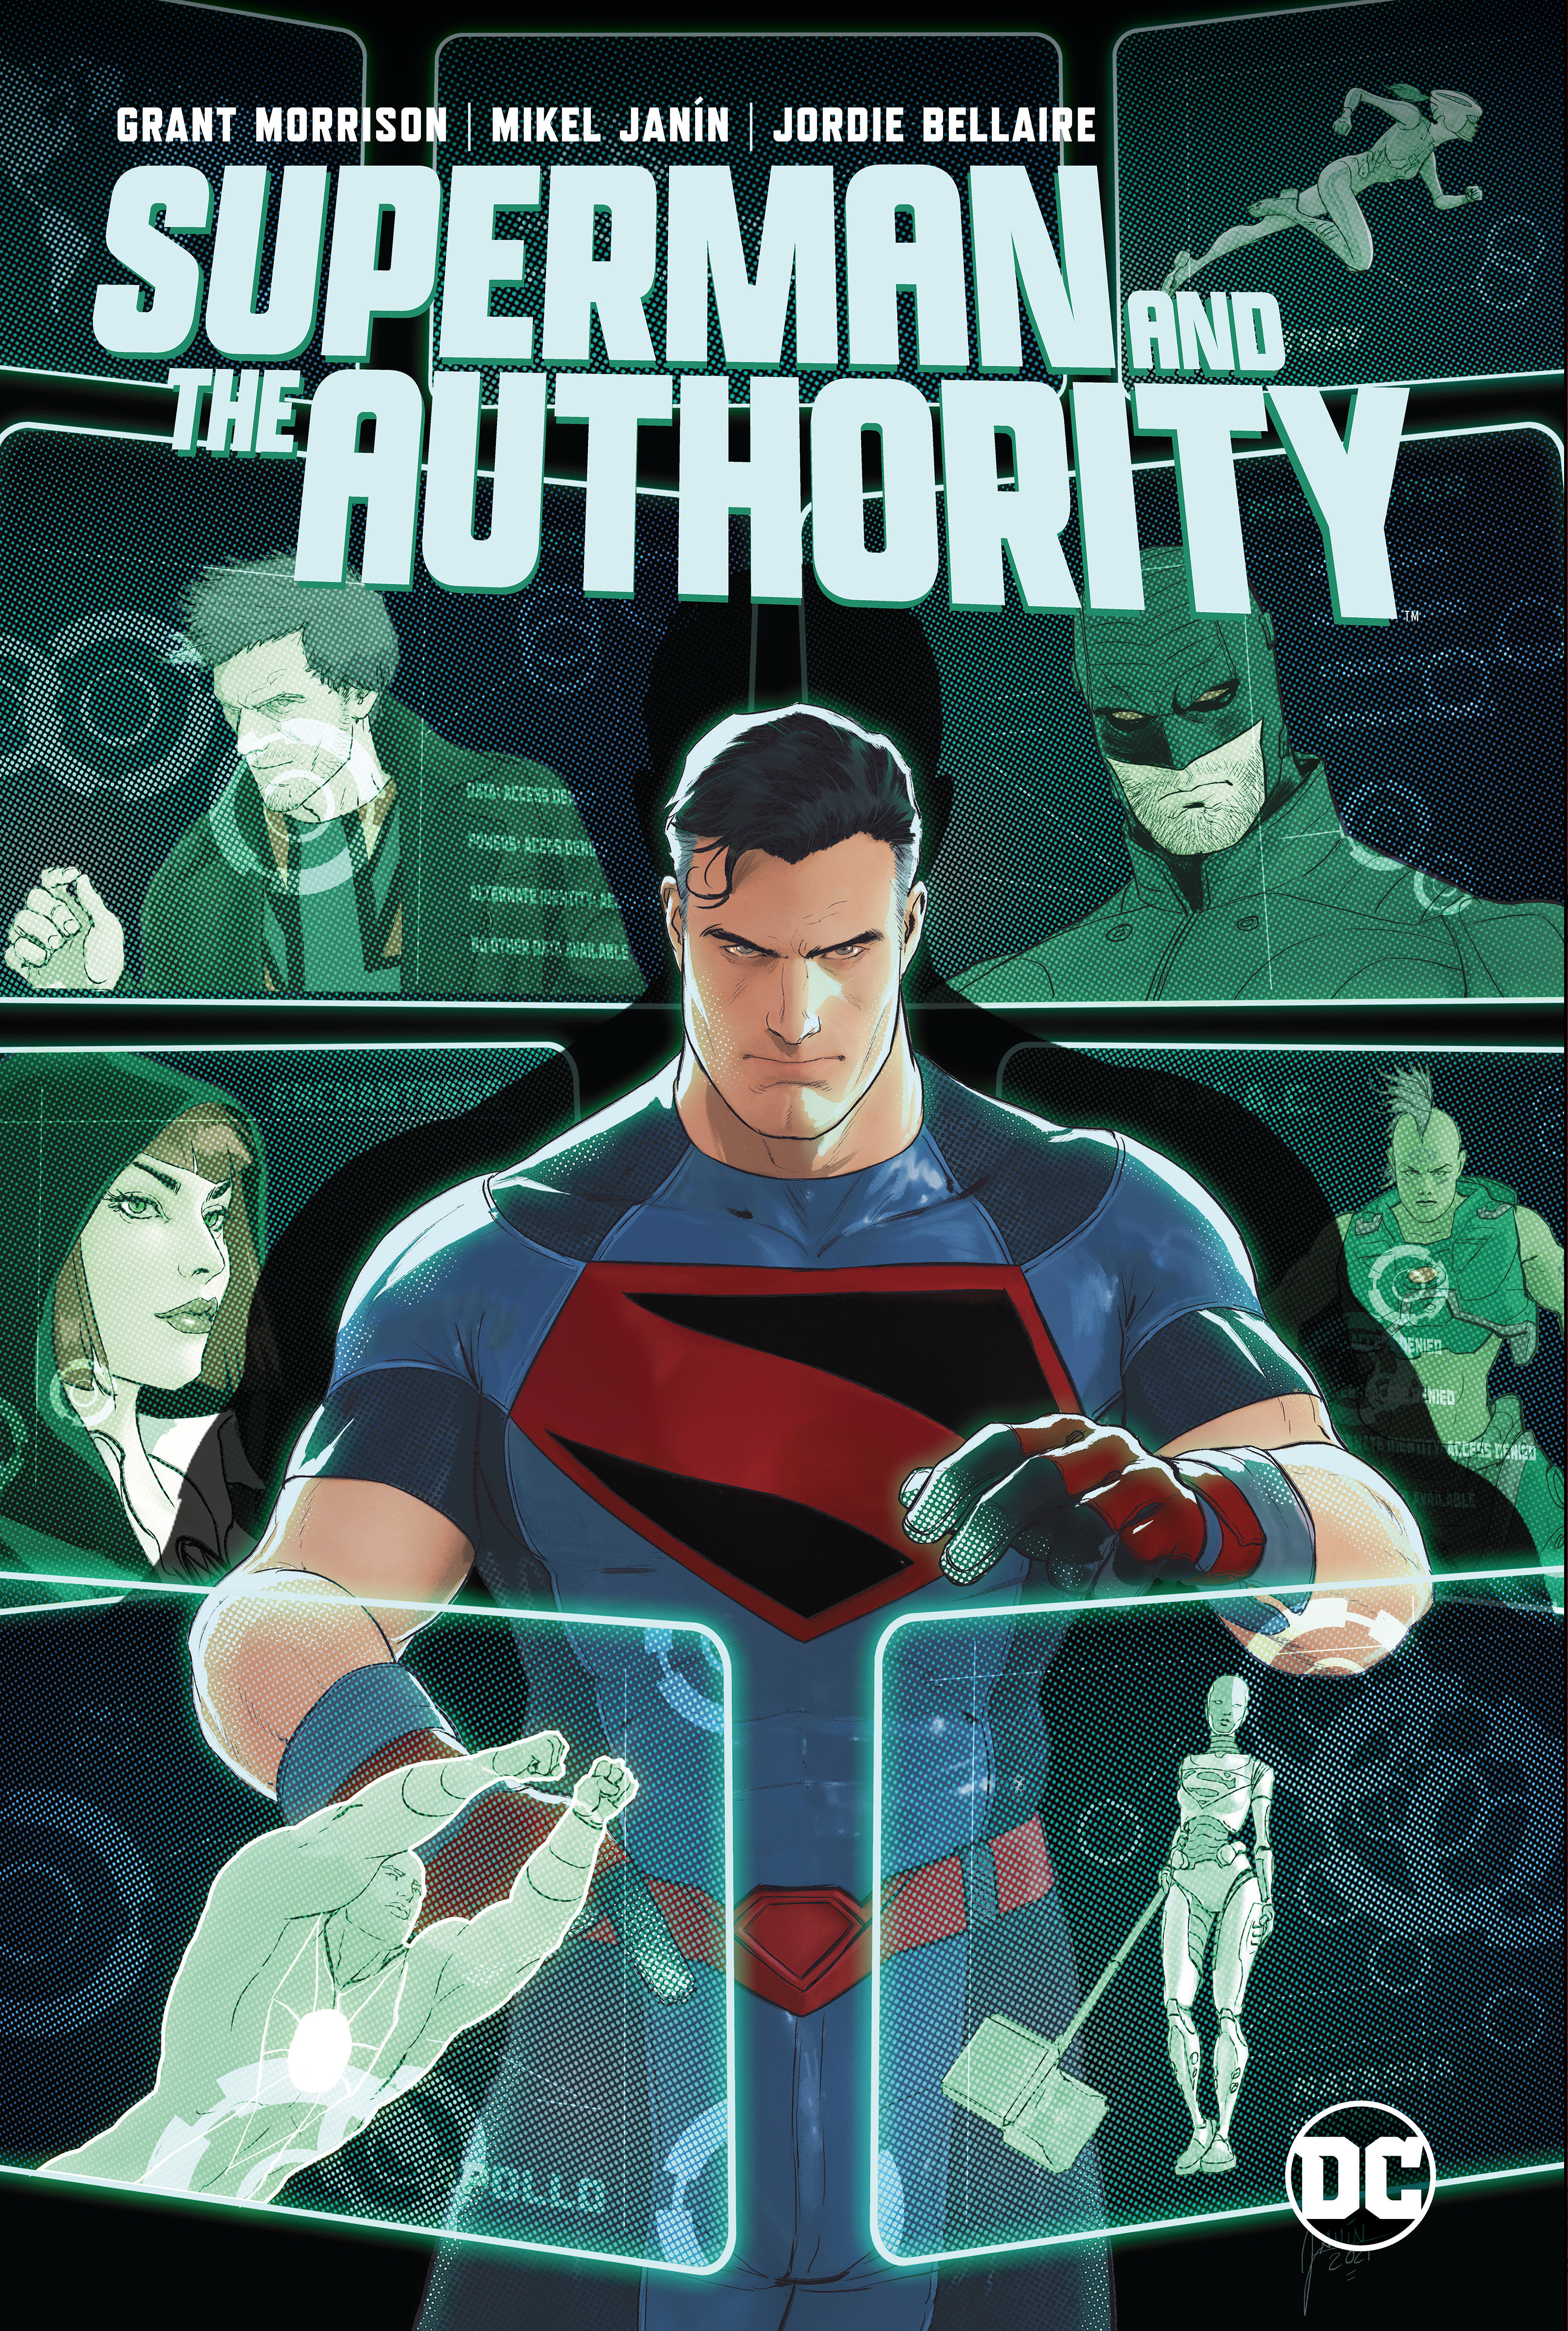 Superman and the Authority Graphic Novel